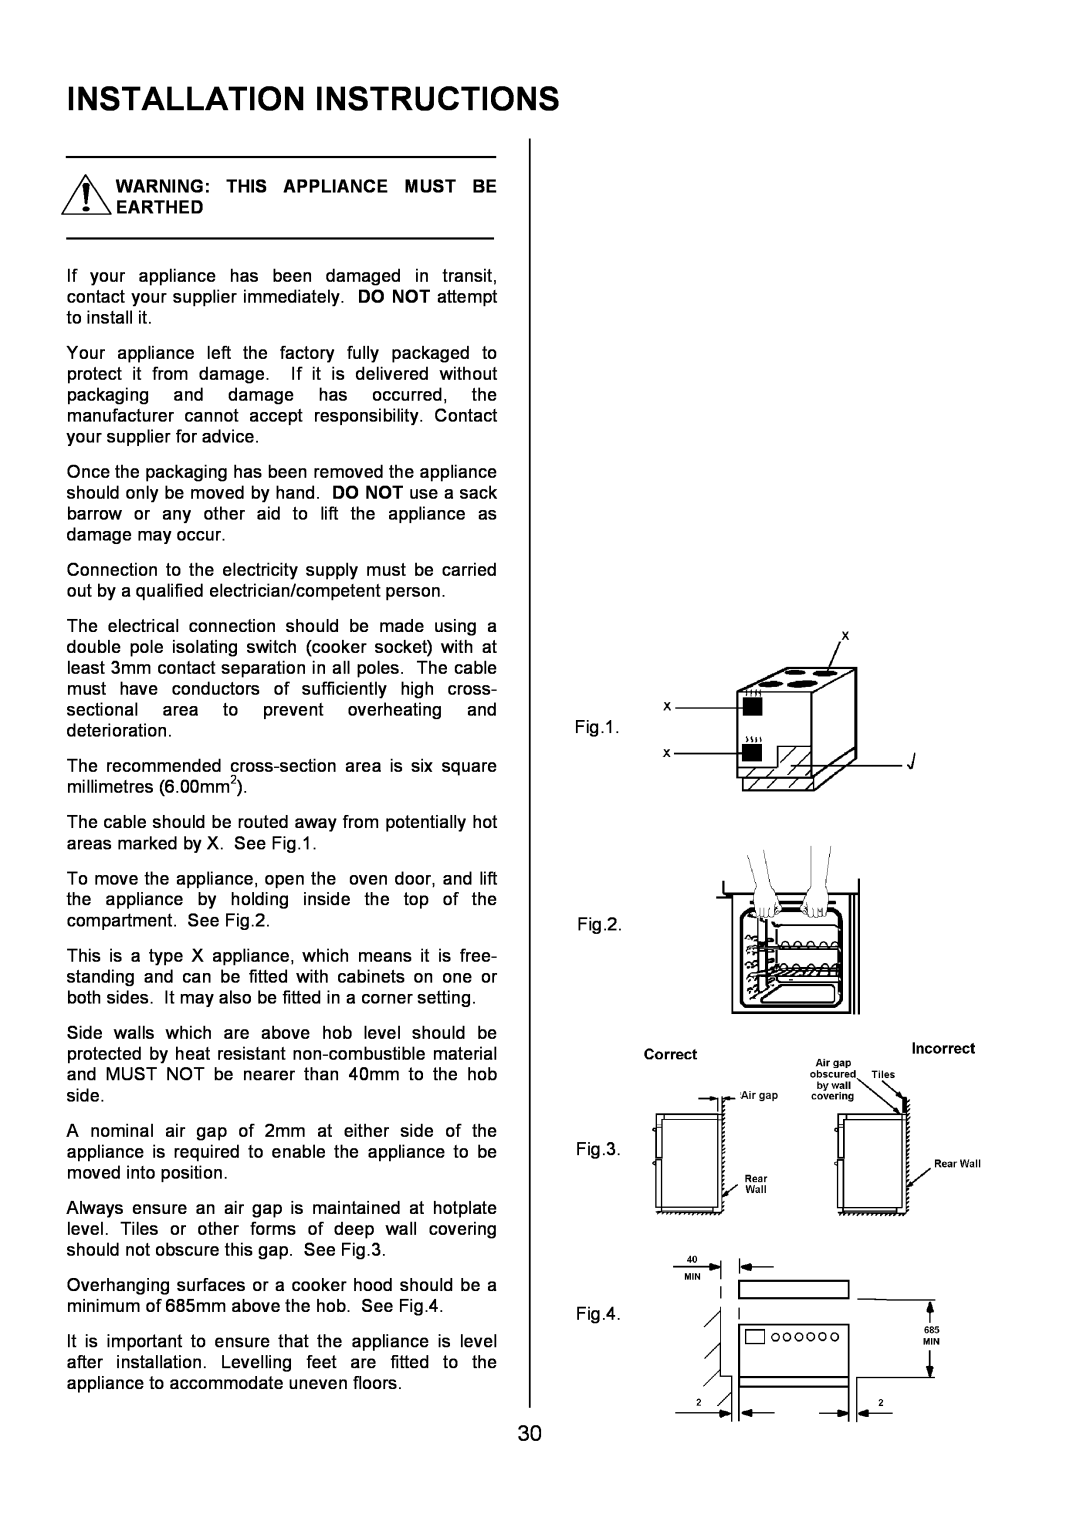 Zanussi ZCE 5001, ZCE 5000 manual Installation Instructions, Warning This Appliance Must Be Earthed 